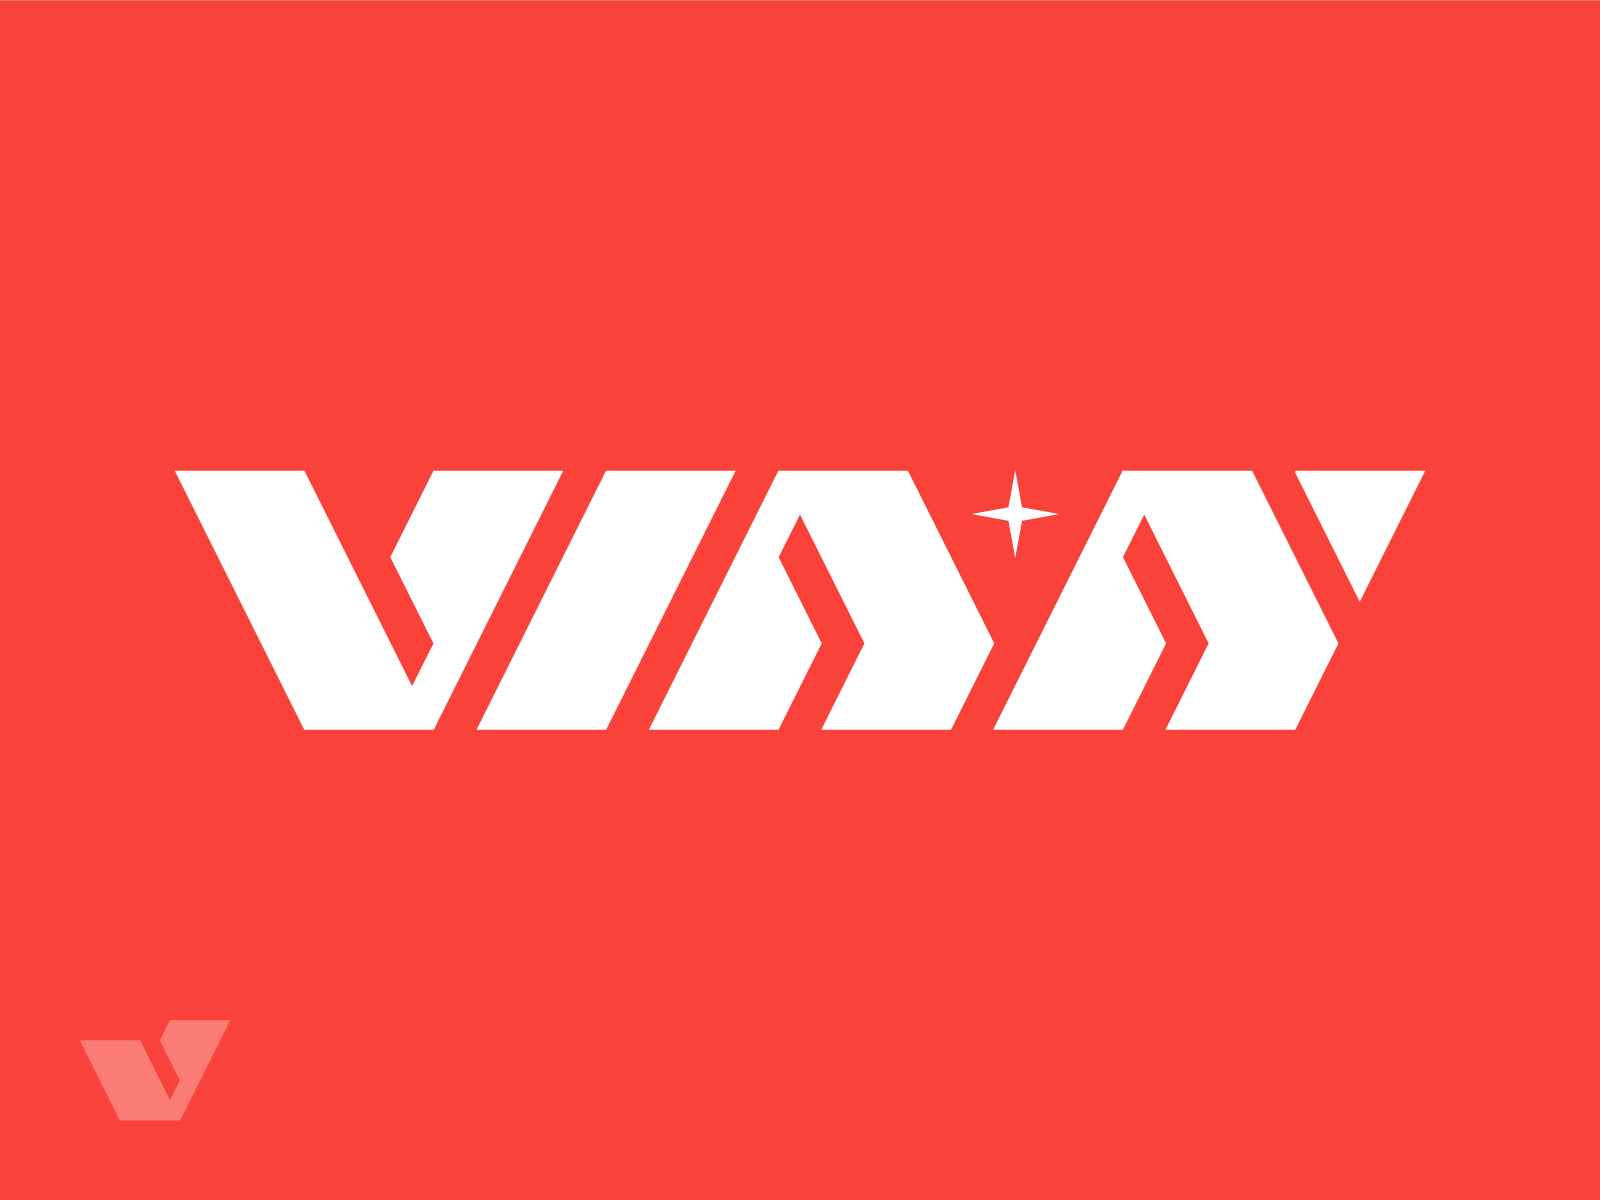 Vijay Name Vector PNG, Vector, PSD, and Clipart With Transparent Background  for Free Download | Pngtree